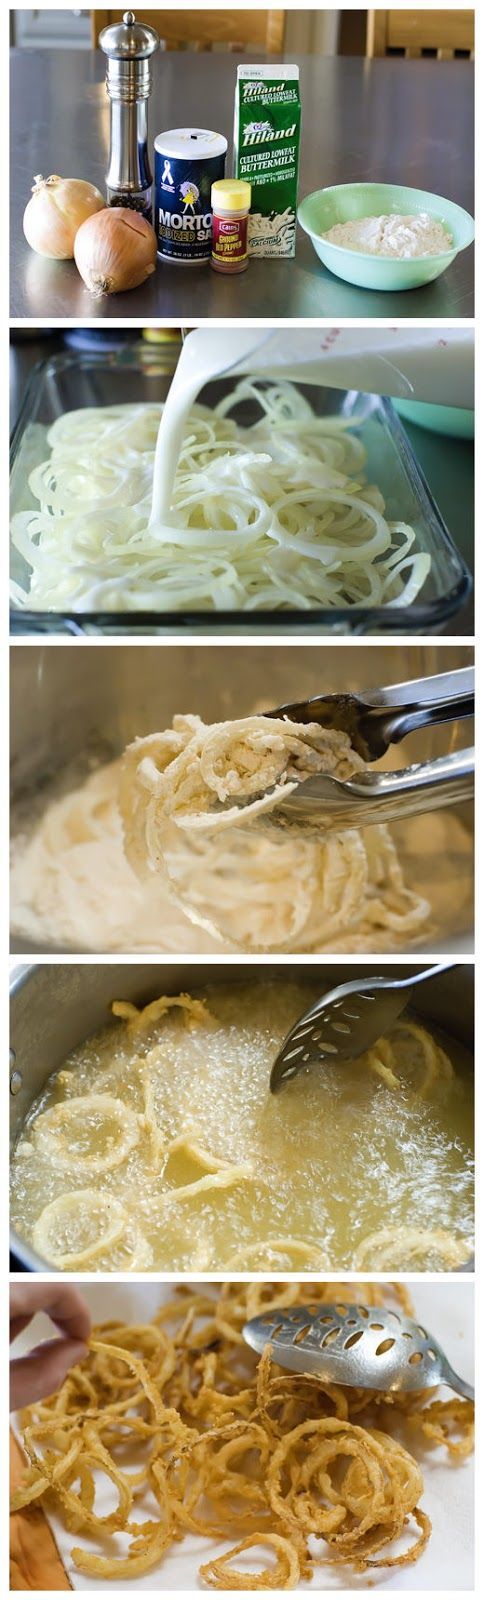 Onion Strings by the pioneer woman- full recipe text on her site is